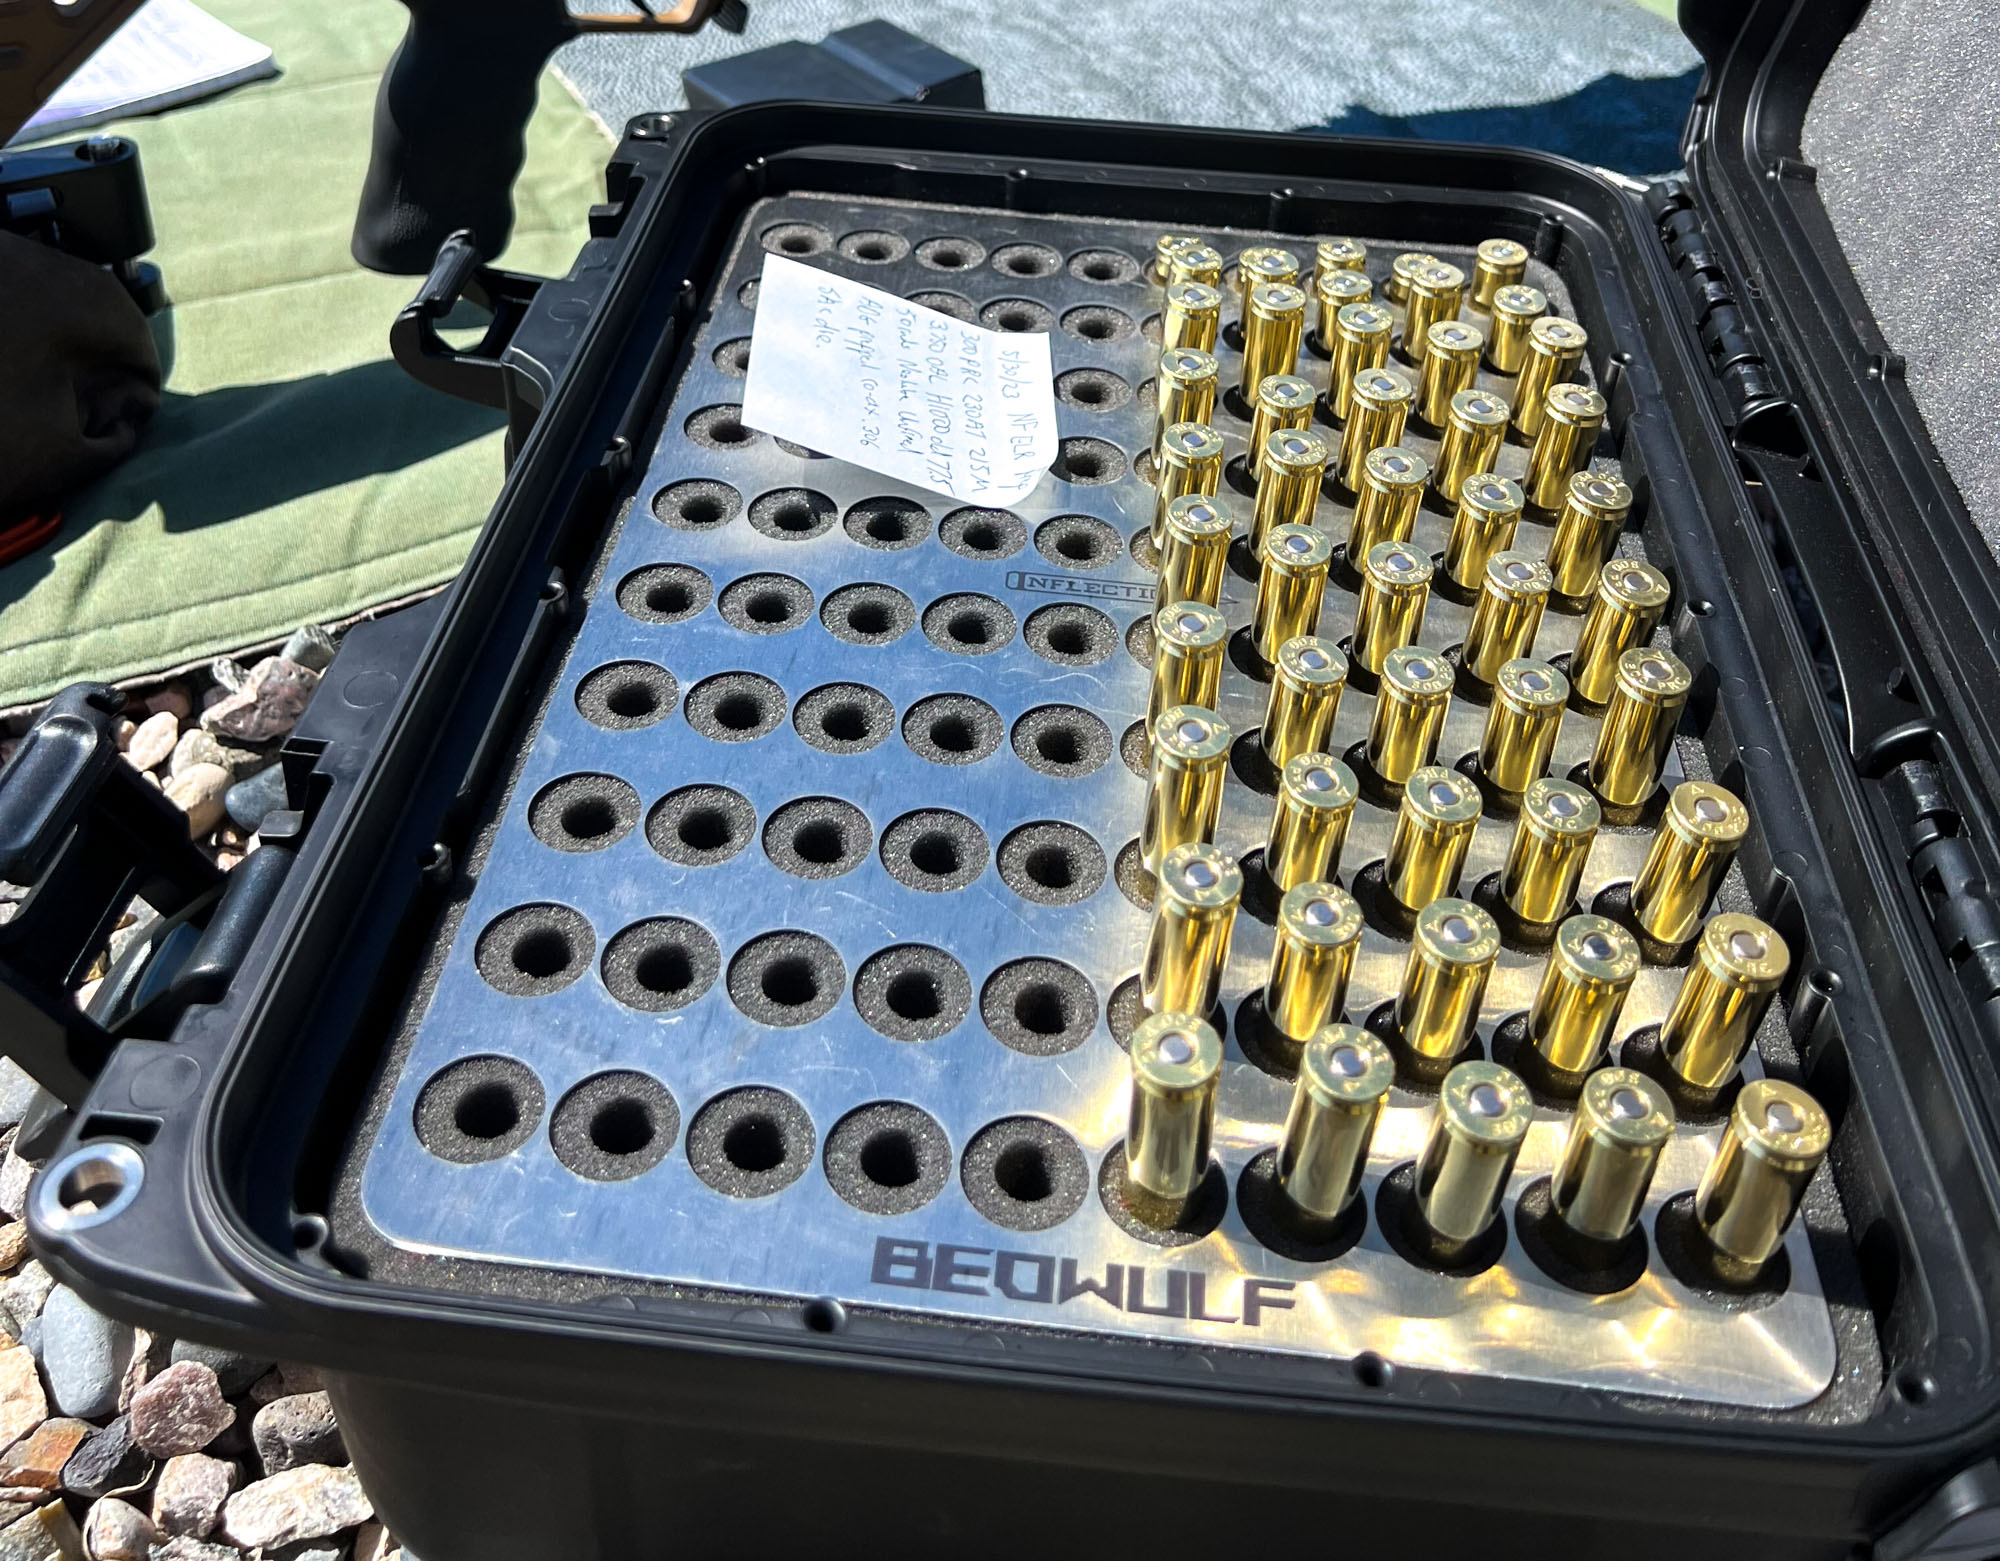 During load development the author kept his ammunition organized in groups of five with different powder charges. 